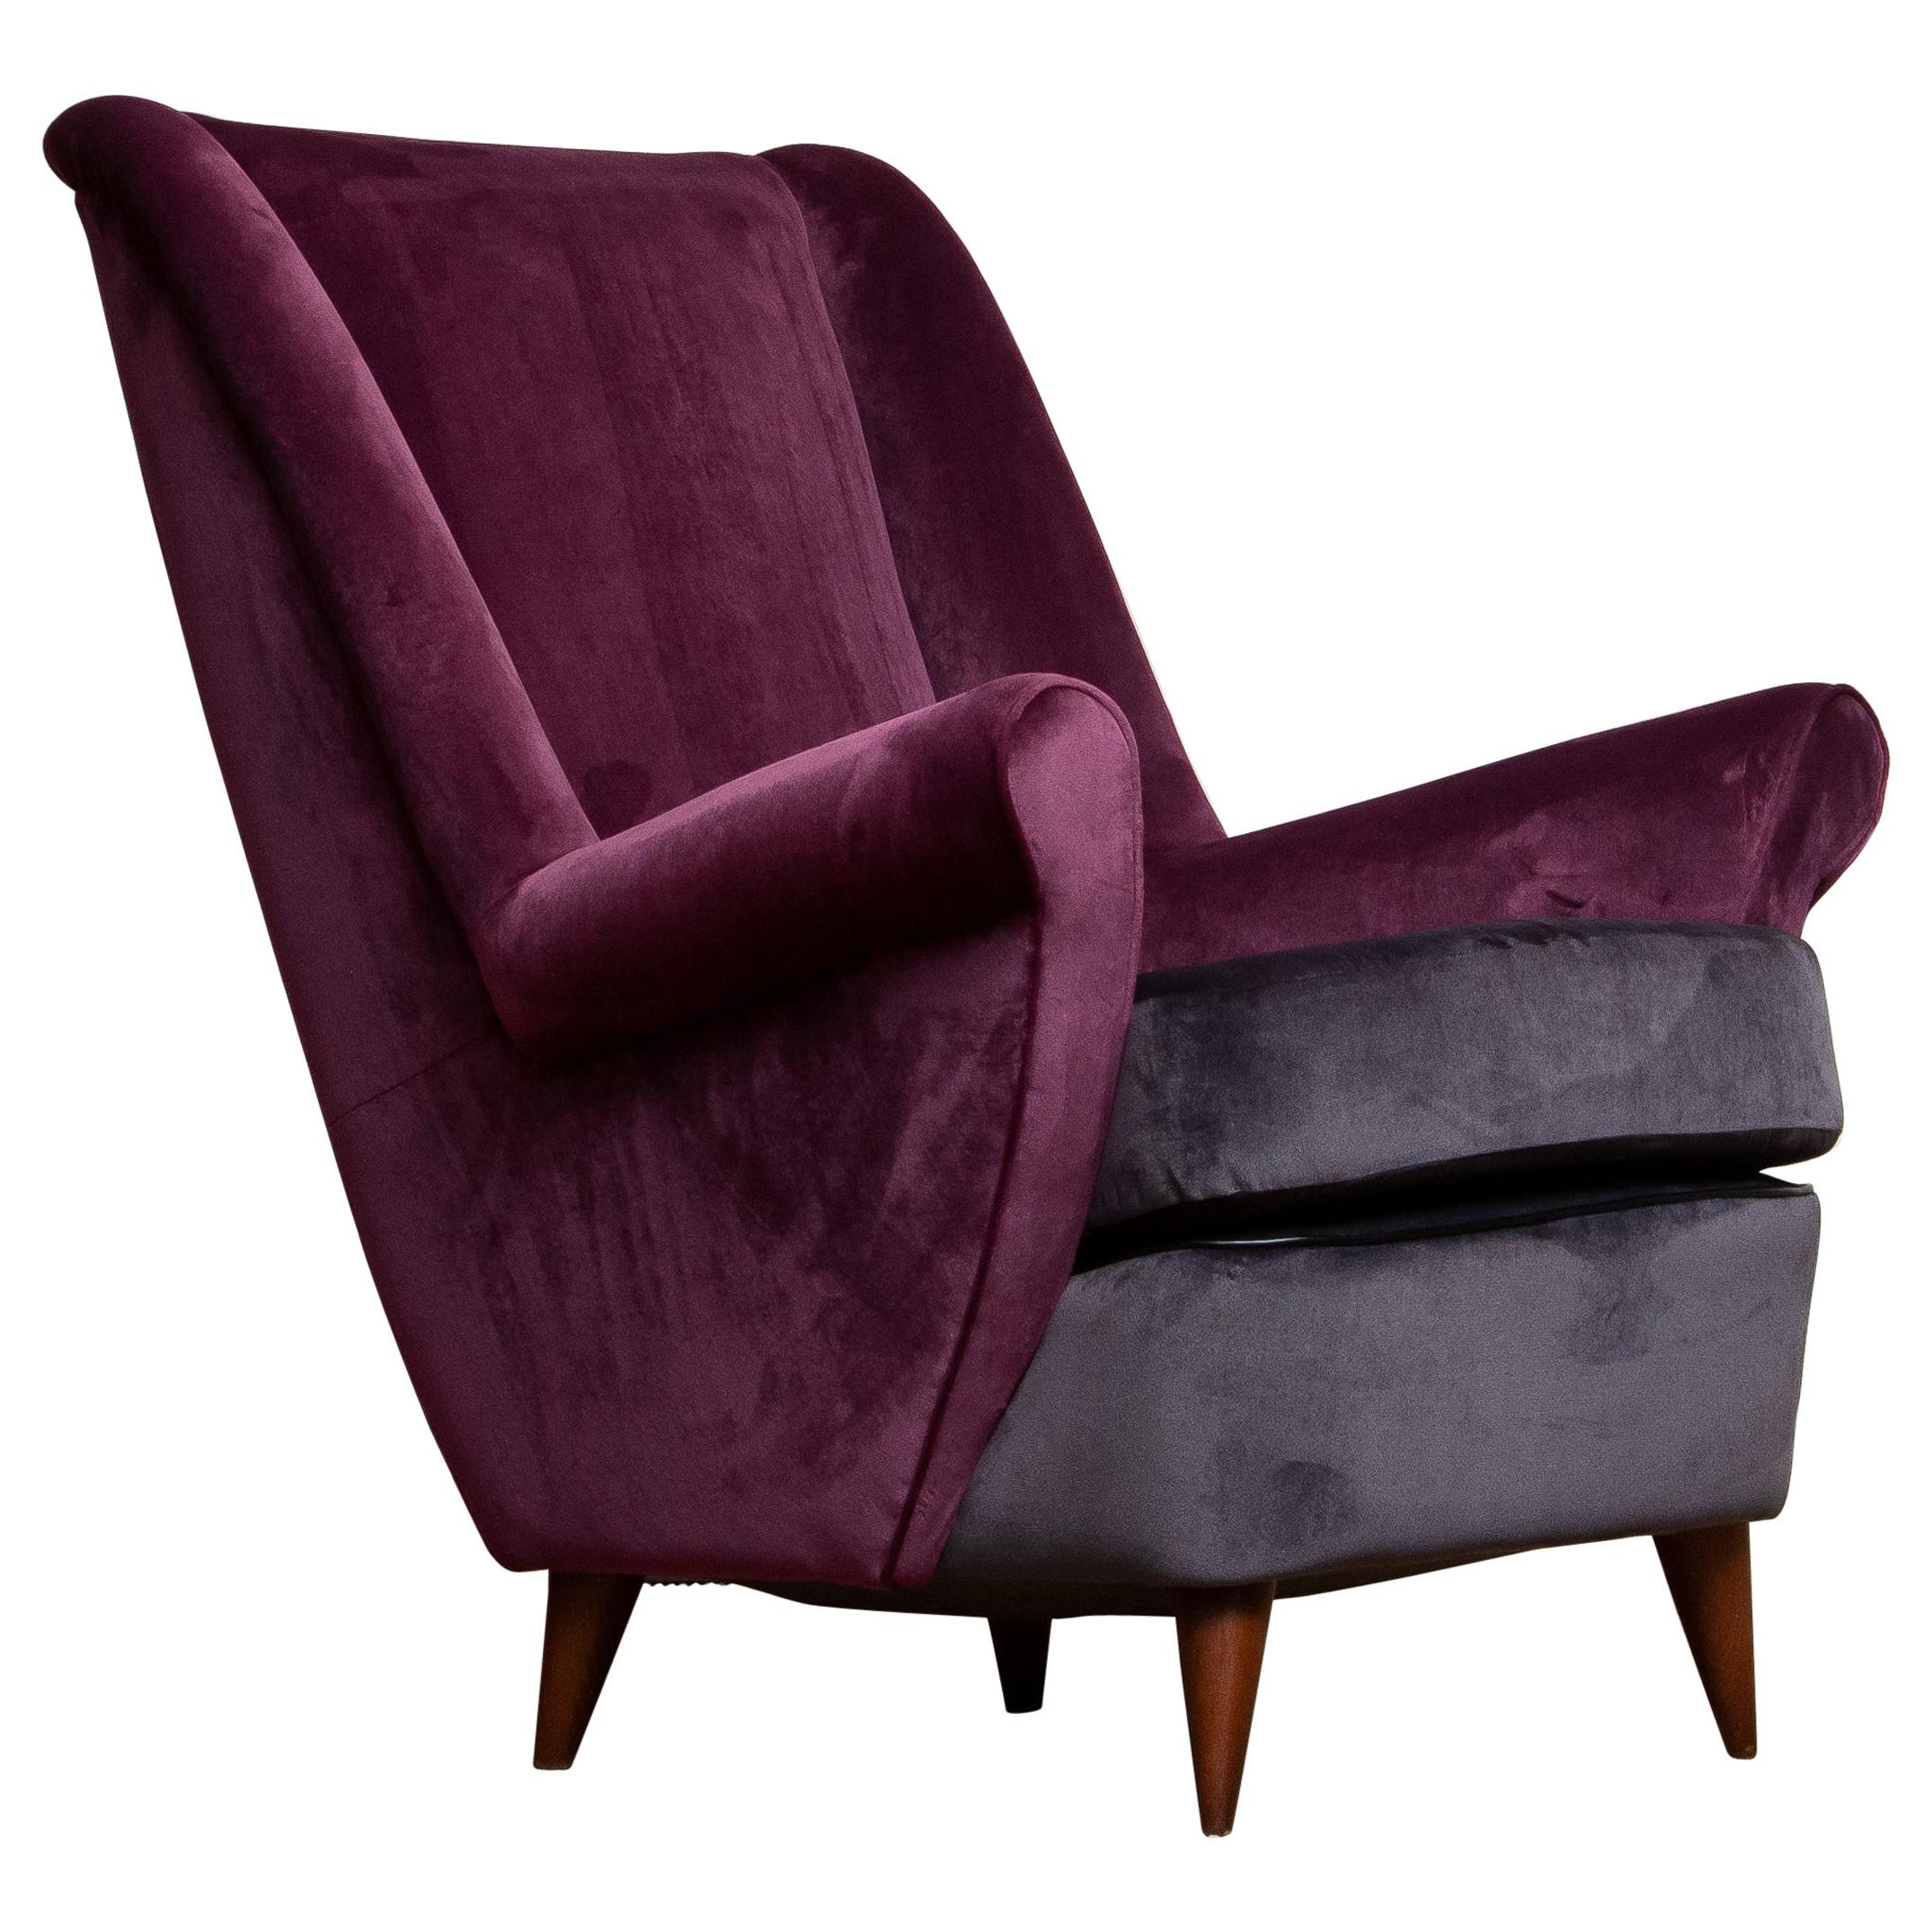 Absolutely beautiful 1950's lounge / easy chair designed by Gio Ponti and made by ISA in Bergamo in Italy. The fabulous color combination and choice of fabric, magenta and dark gray, makes this chair a real eye catcher. This chairs are completely